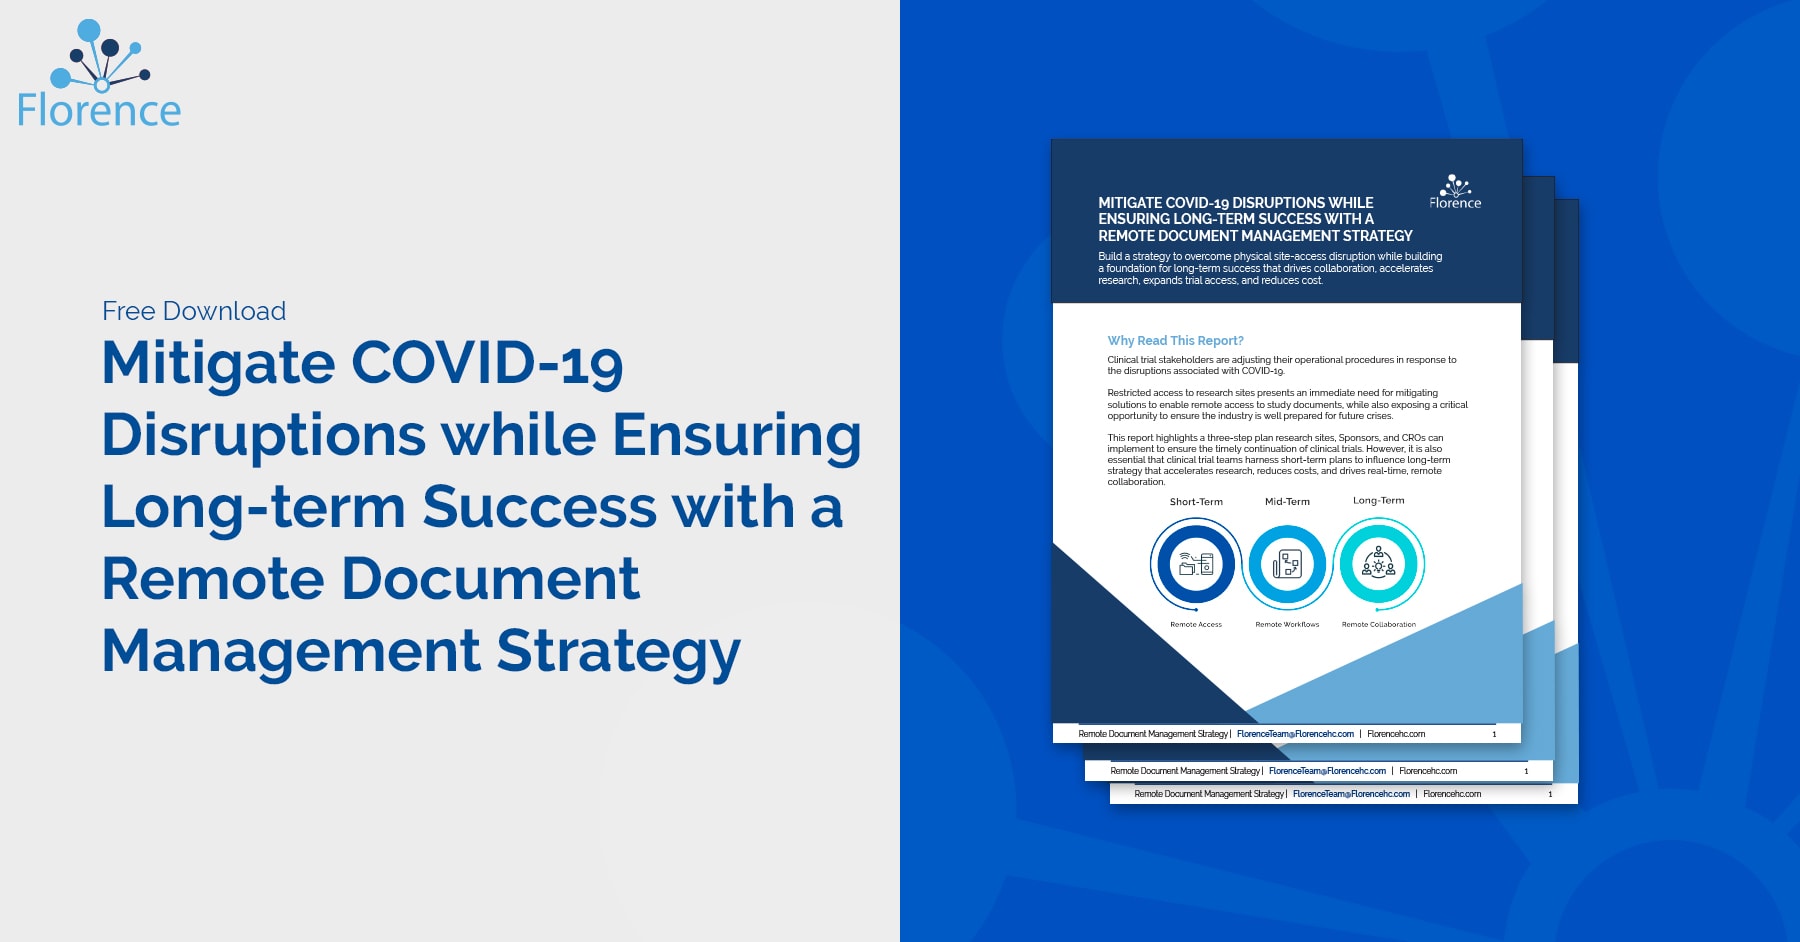 Mitigate COVID-19 Disruptions while Ensuring Long-term Success with a Remote Document Management Strategy